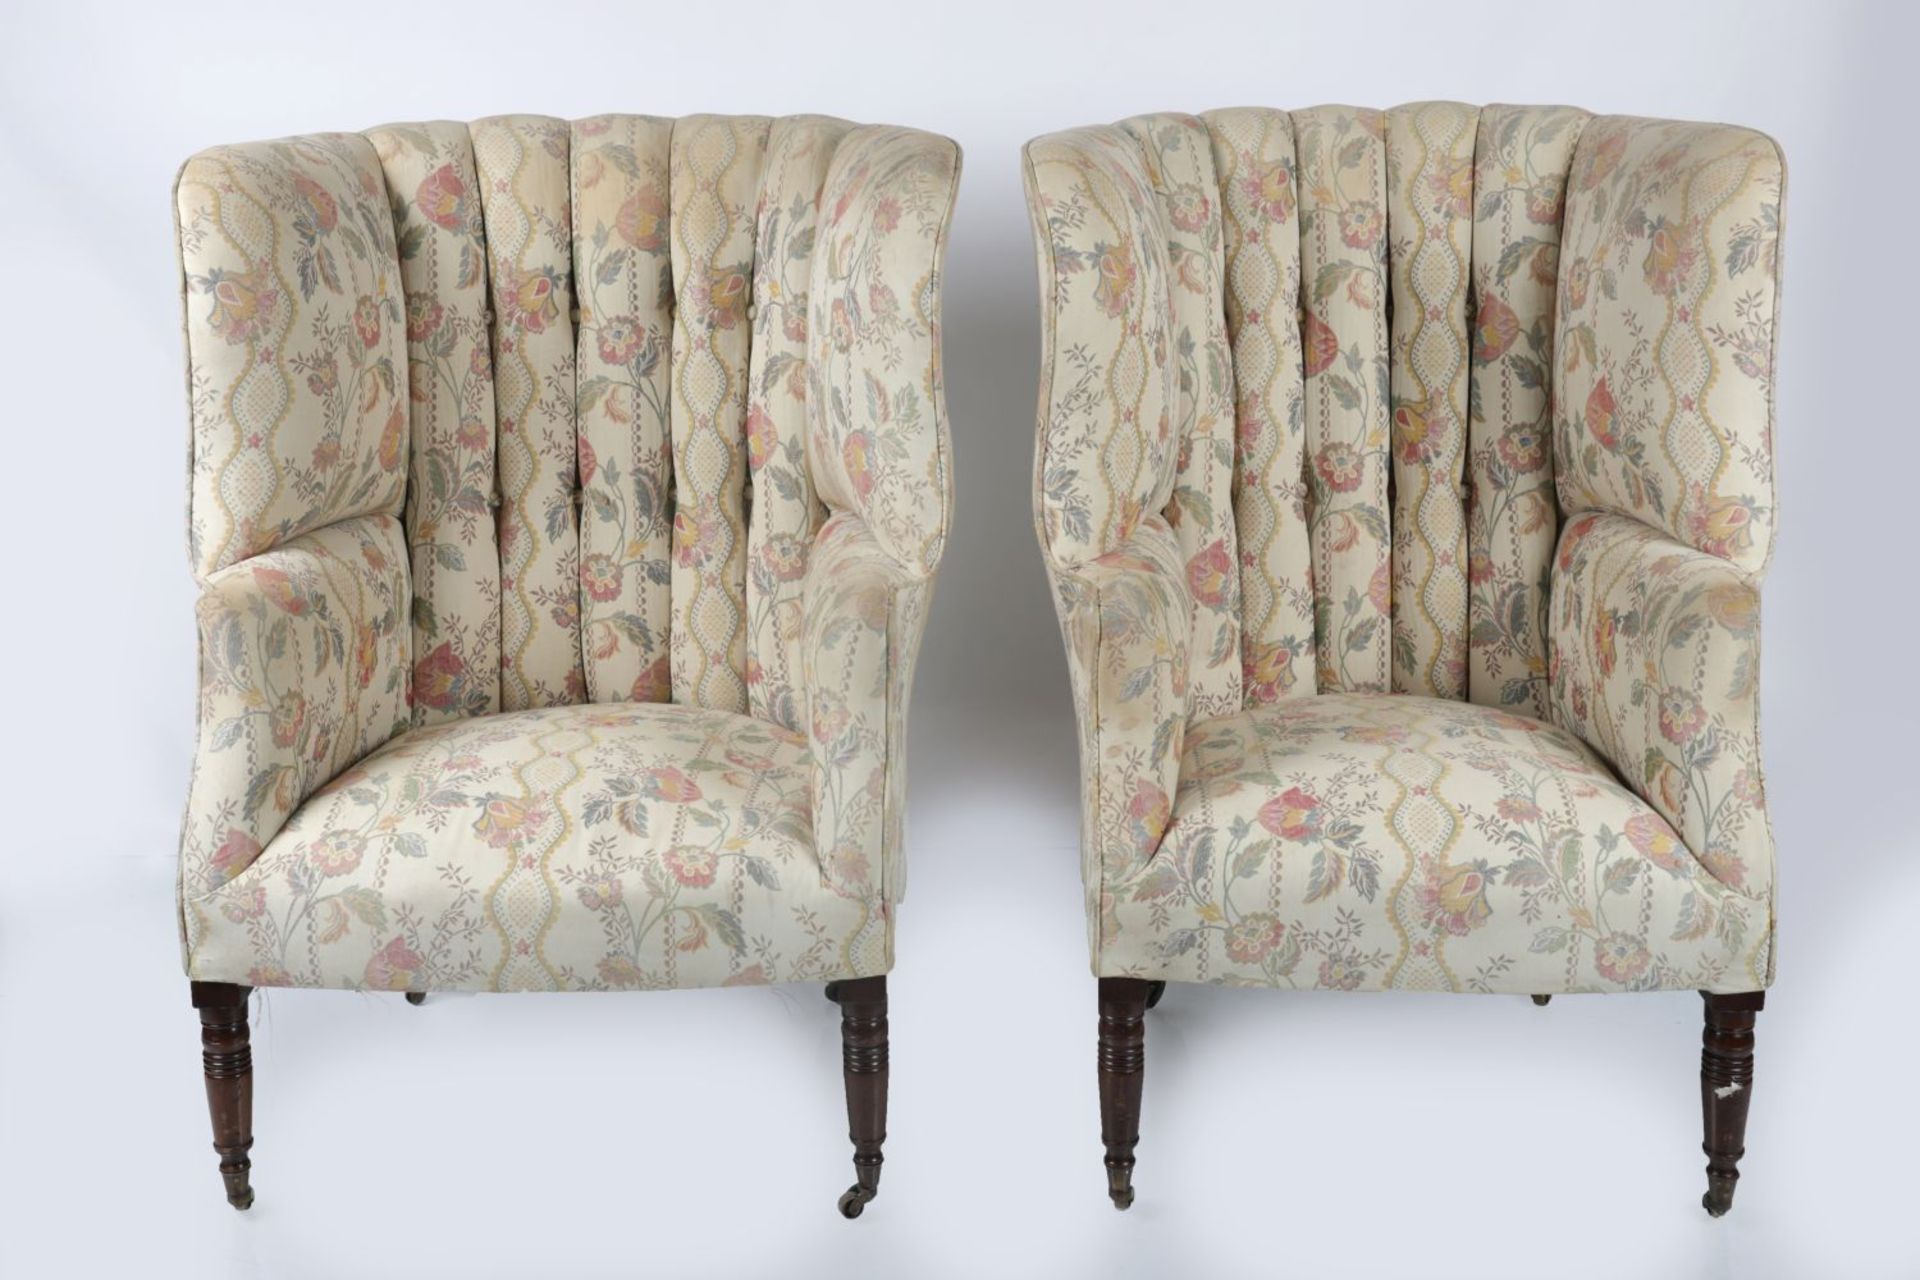 PAIR GEORGE III SYTLE WING BACK ARMCHAIRS